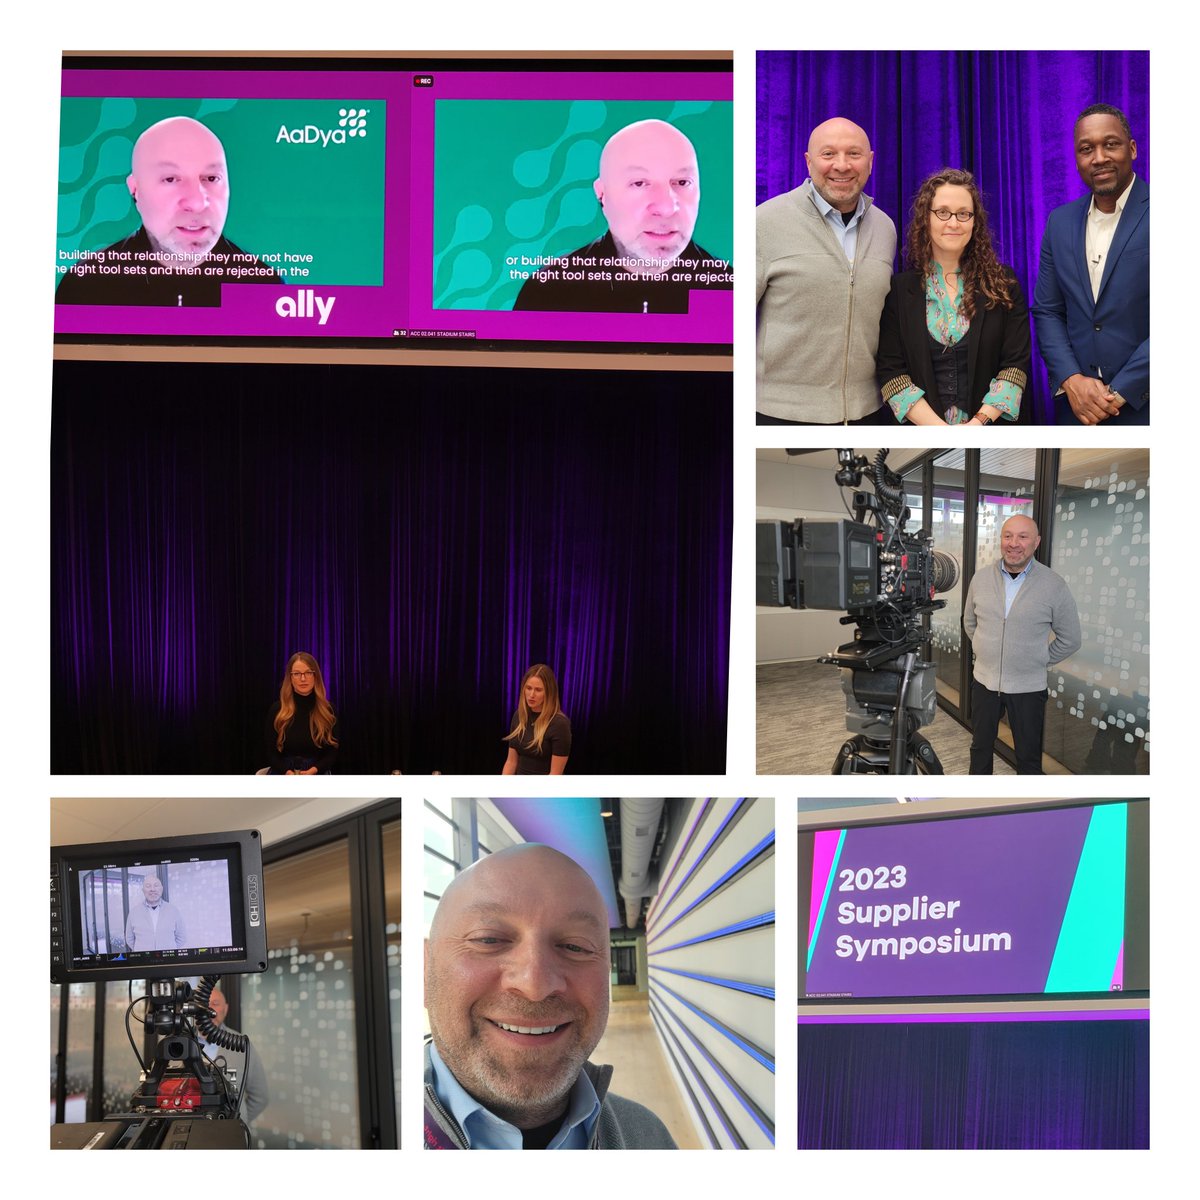 Thank you @Ally for including @AaDyaSecurity in your global supplier symposium. It was wonderful to learn more about the small and medium sized businesses you work with through your #DEI program.  We were thrilled to be part of the discussion and have everyone #MeetJudy